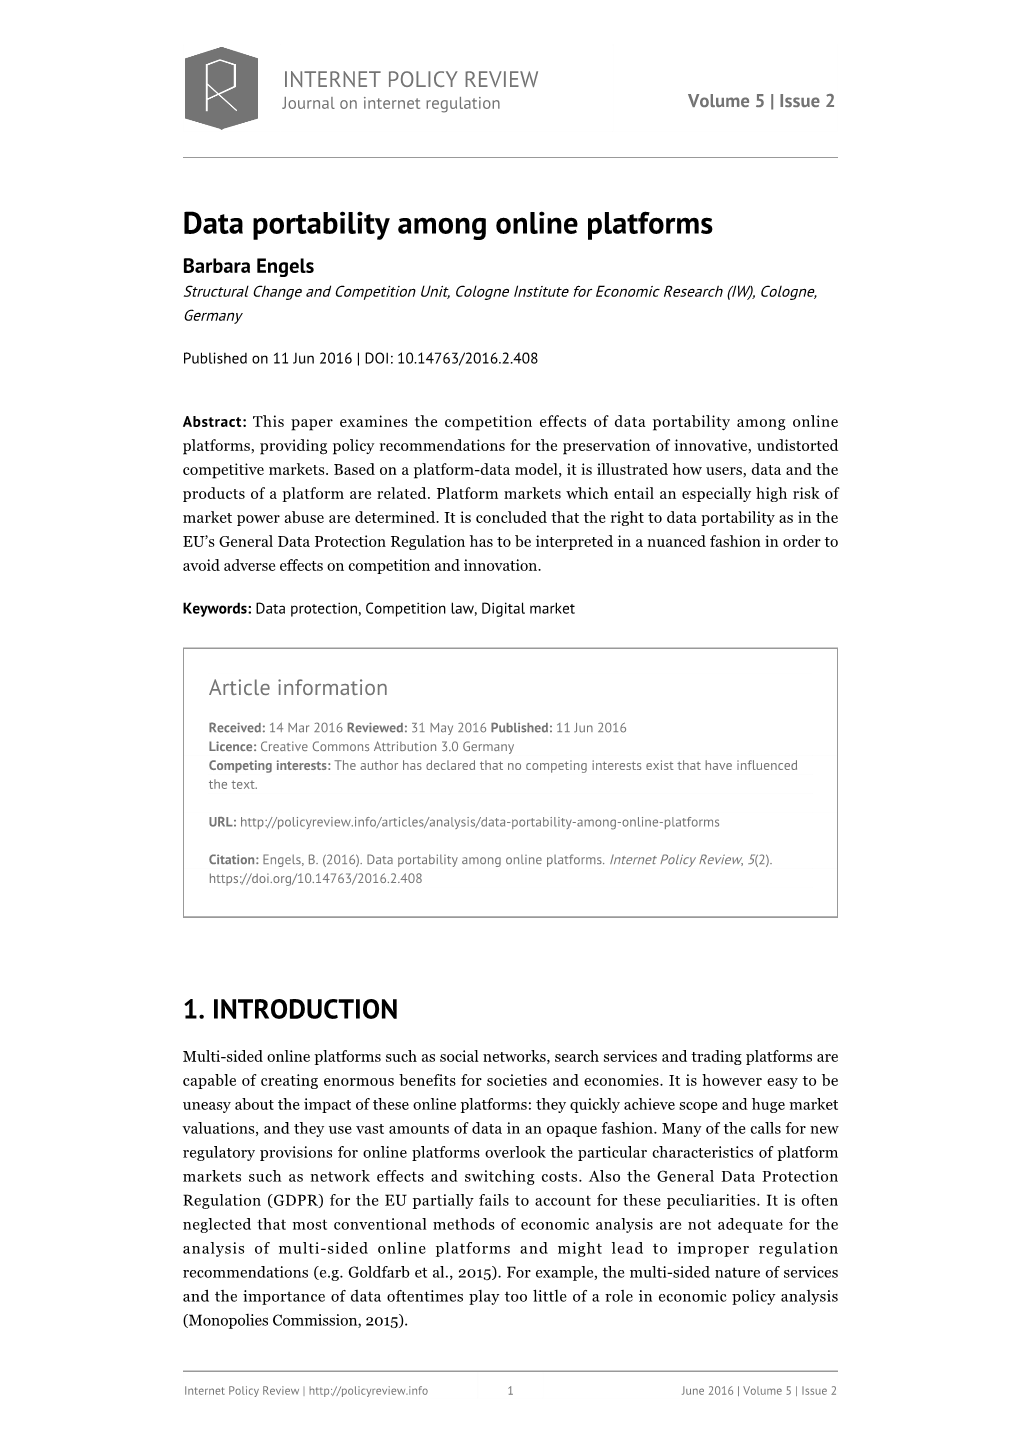 Data Portability Among Online Platforms Barbara Engels Structural Change and Competition Unit, Cologne Institute for Economic Research (IW), Cologne, Germany